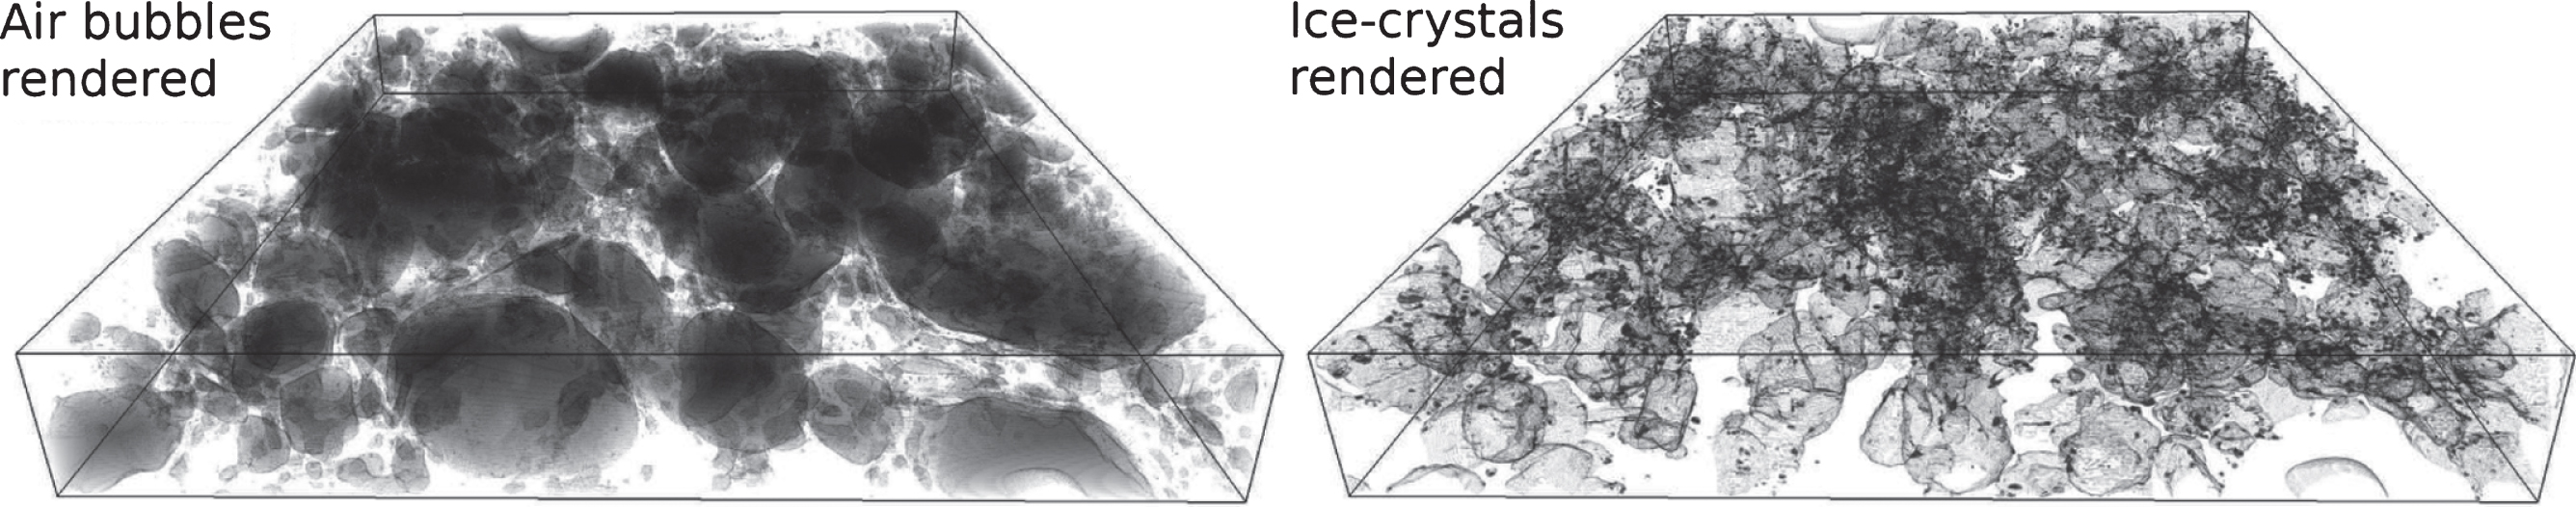 Rendered sub-volumes after segmentation for air bubbles (left) and ice-crystals (right).